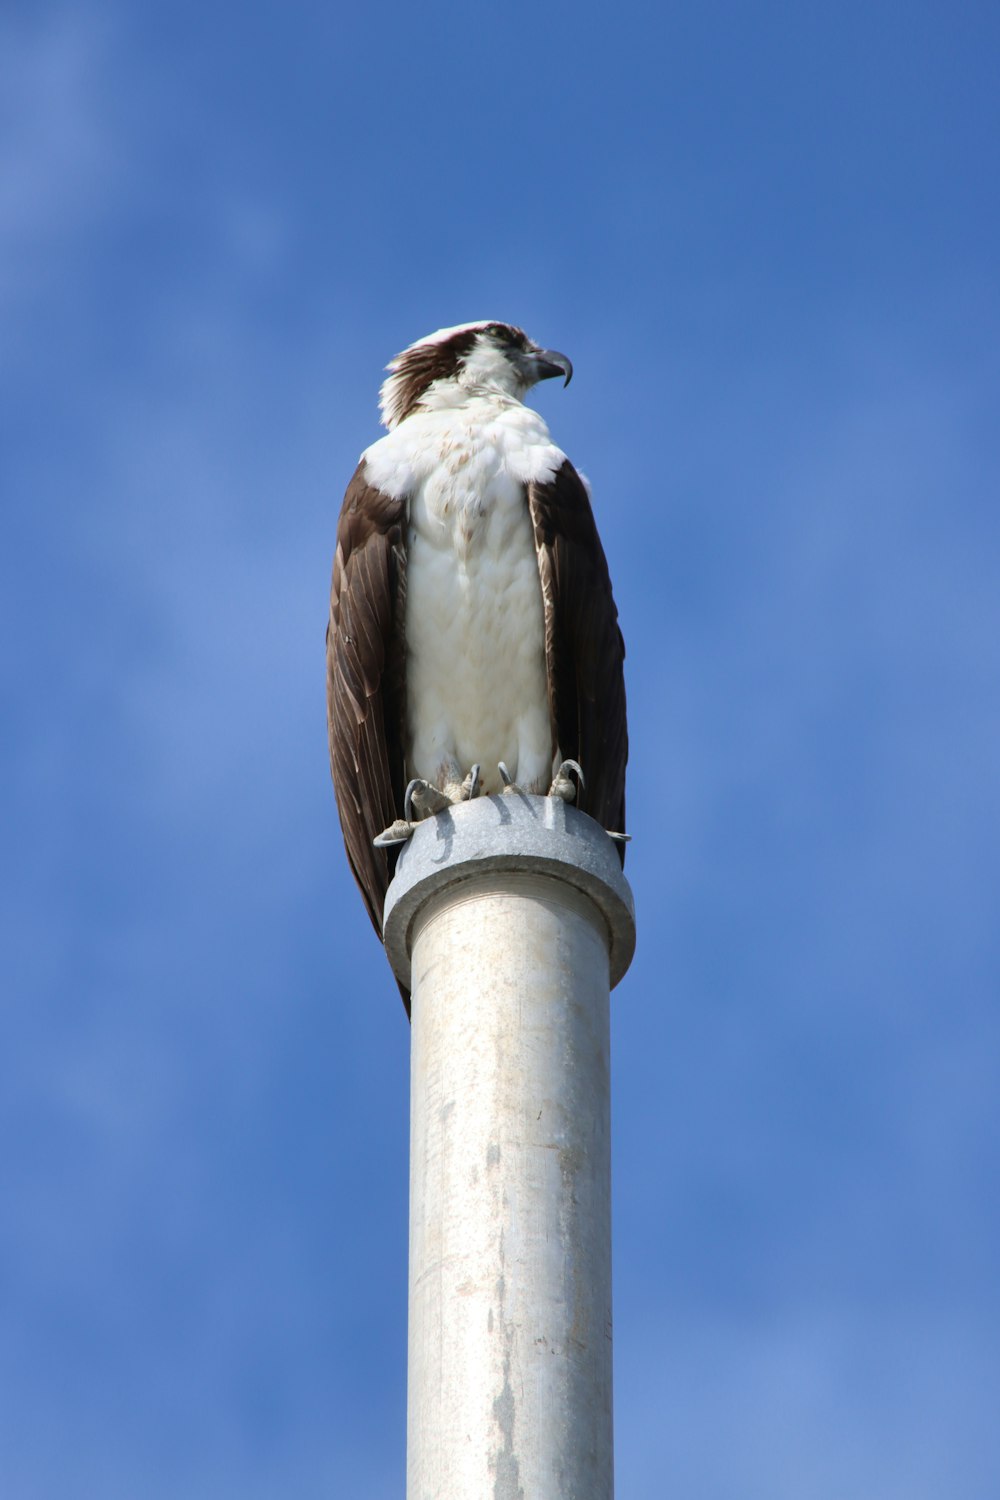 a brown and white bird sitting on top of a pole